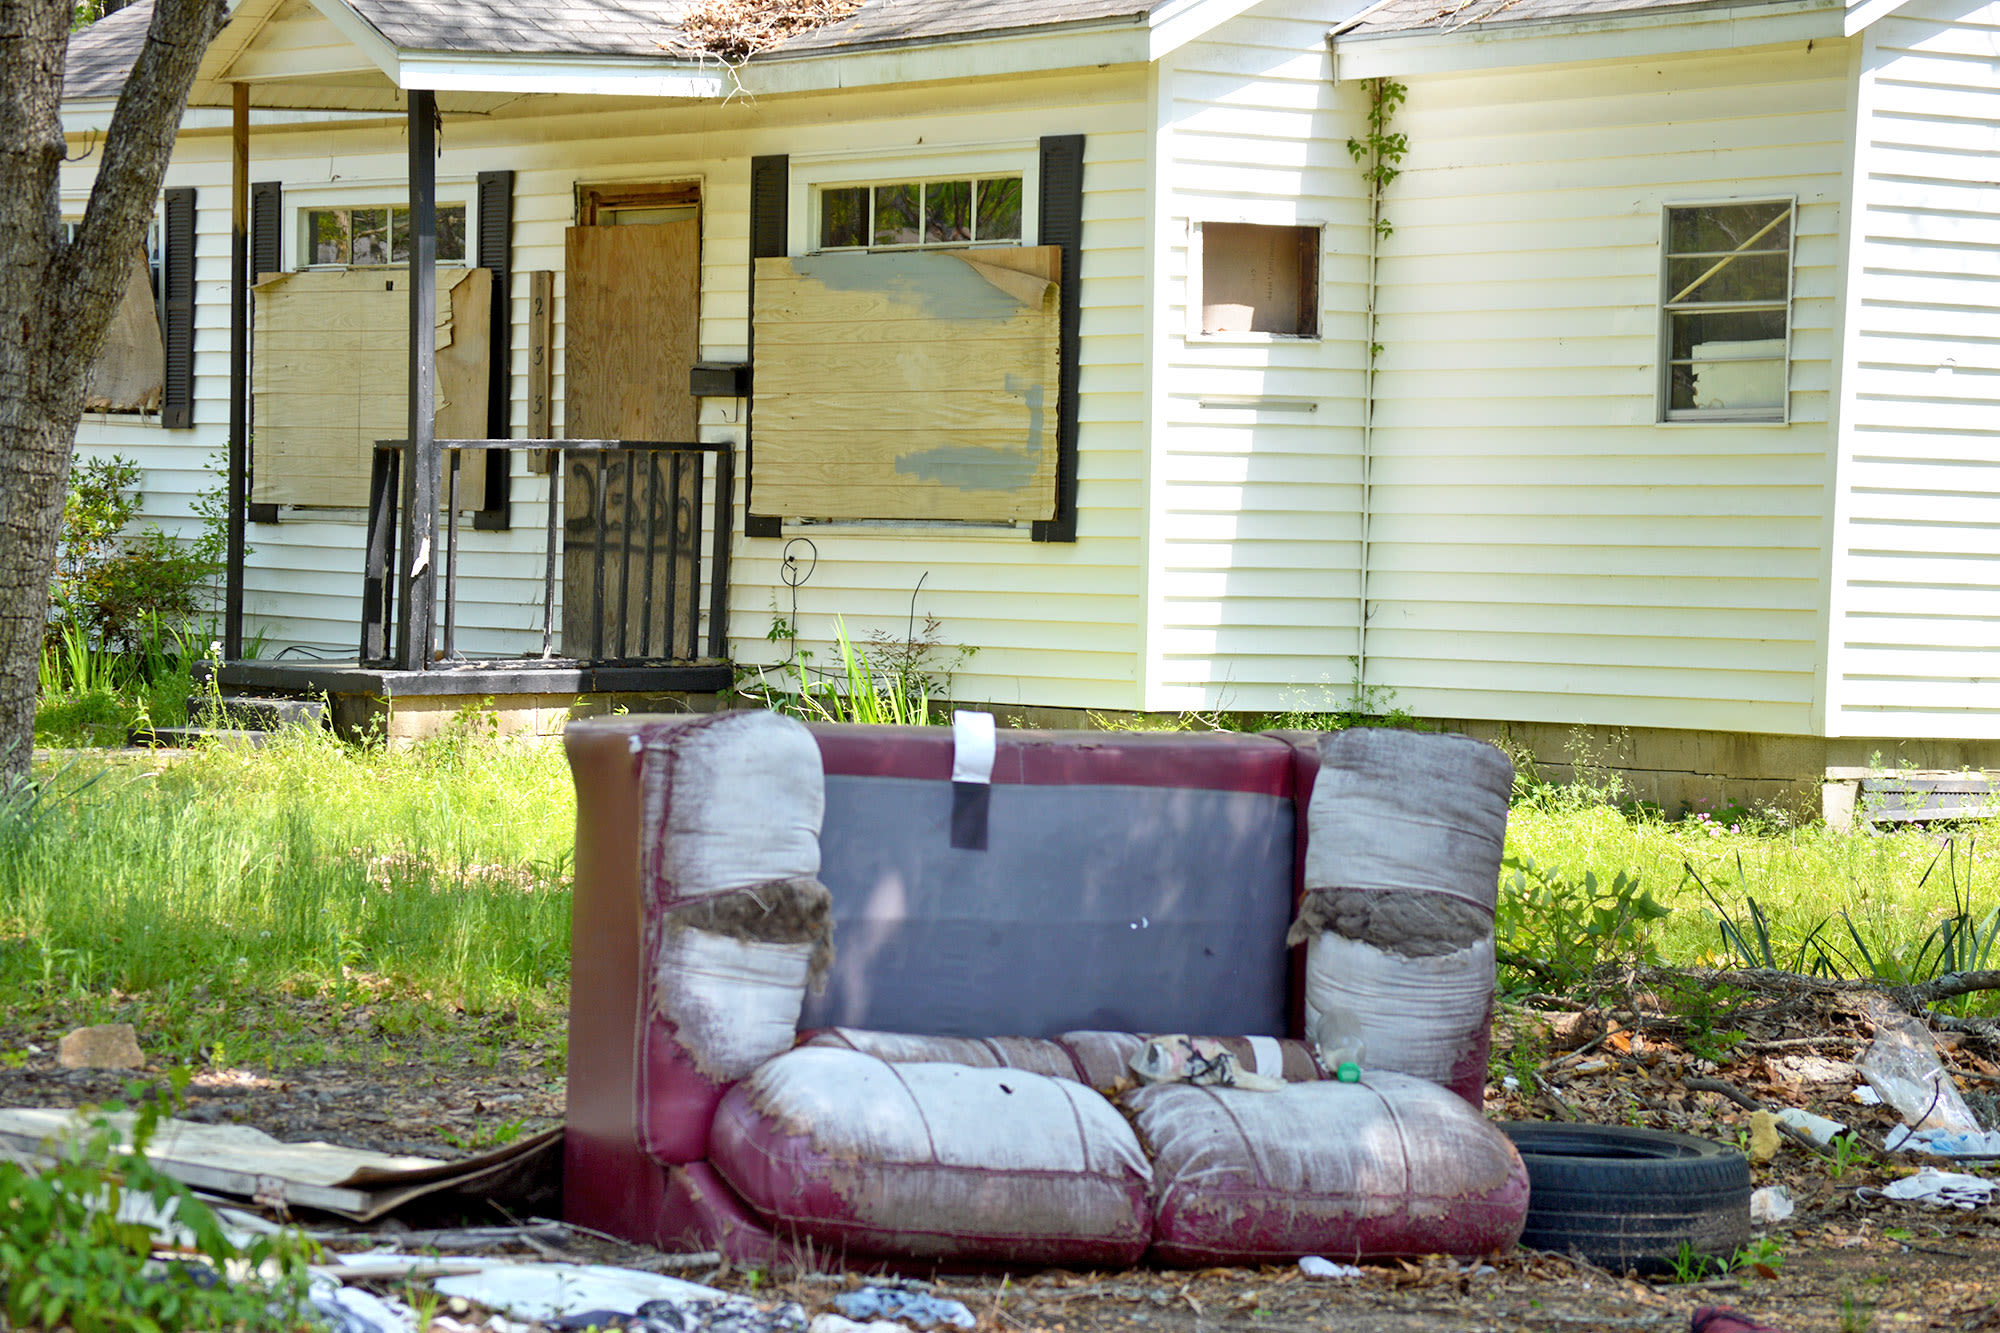 Jackson Fights Back Against Increase in Illegal Dumping